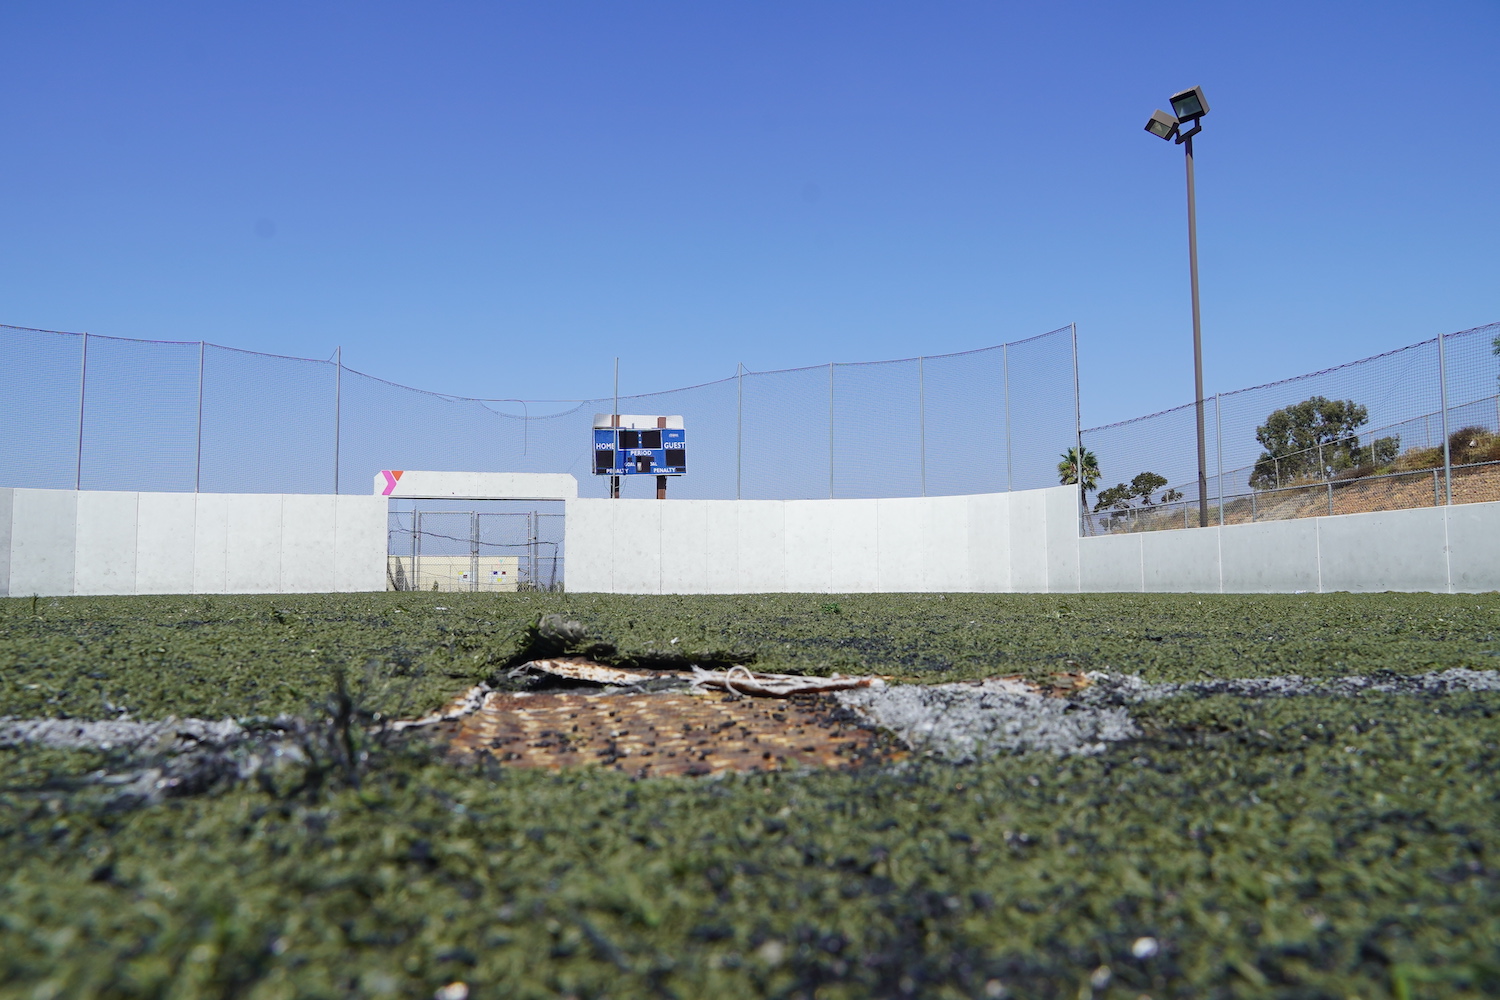 Border View YMCA's decaying soccer field that is being replaced in partnership with PNC bank and the San Diego Wave soccer team